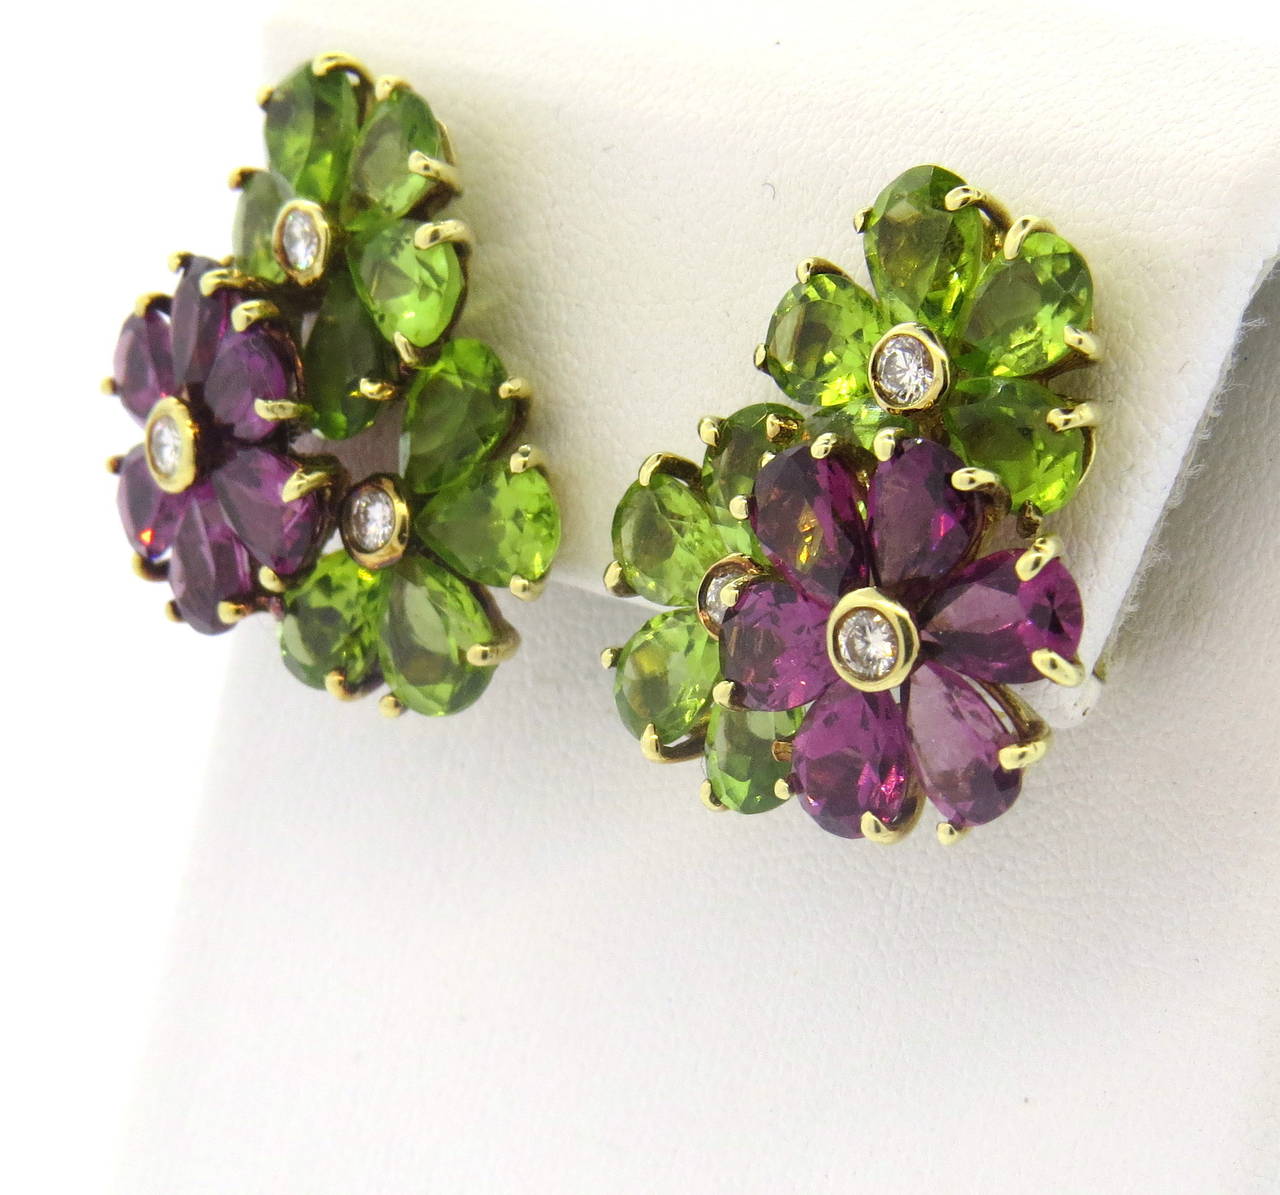 A pair of 14k yellow gold earrings, set with Peridot, Amethyst and approx.  0.40 -0.46ctw in G/VS diamonds.  The earrings measure 28mm x 22mm and weigh 17 grams.